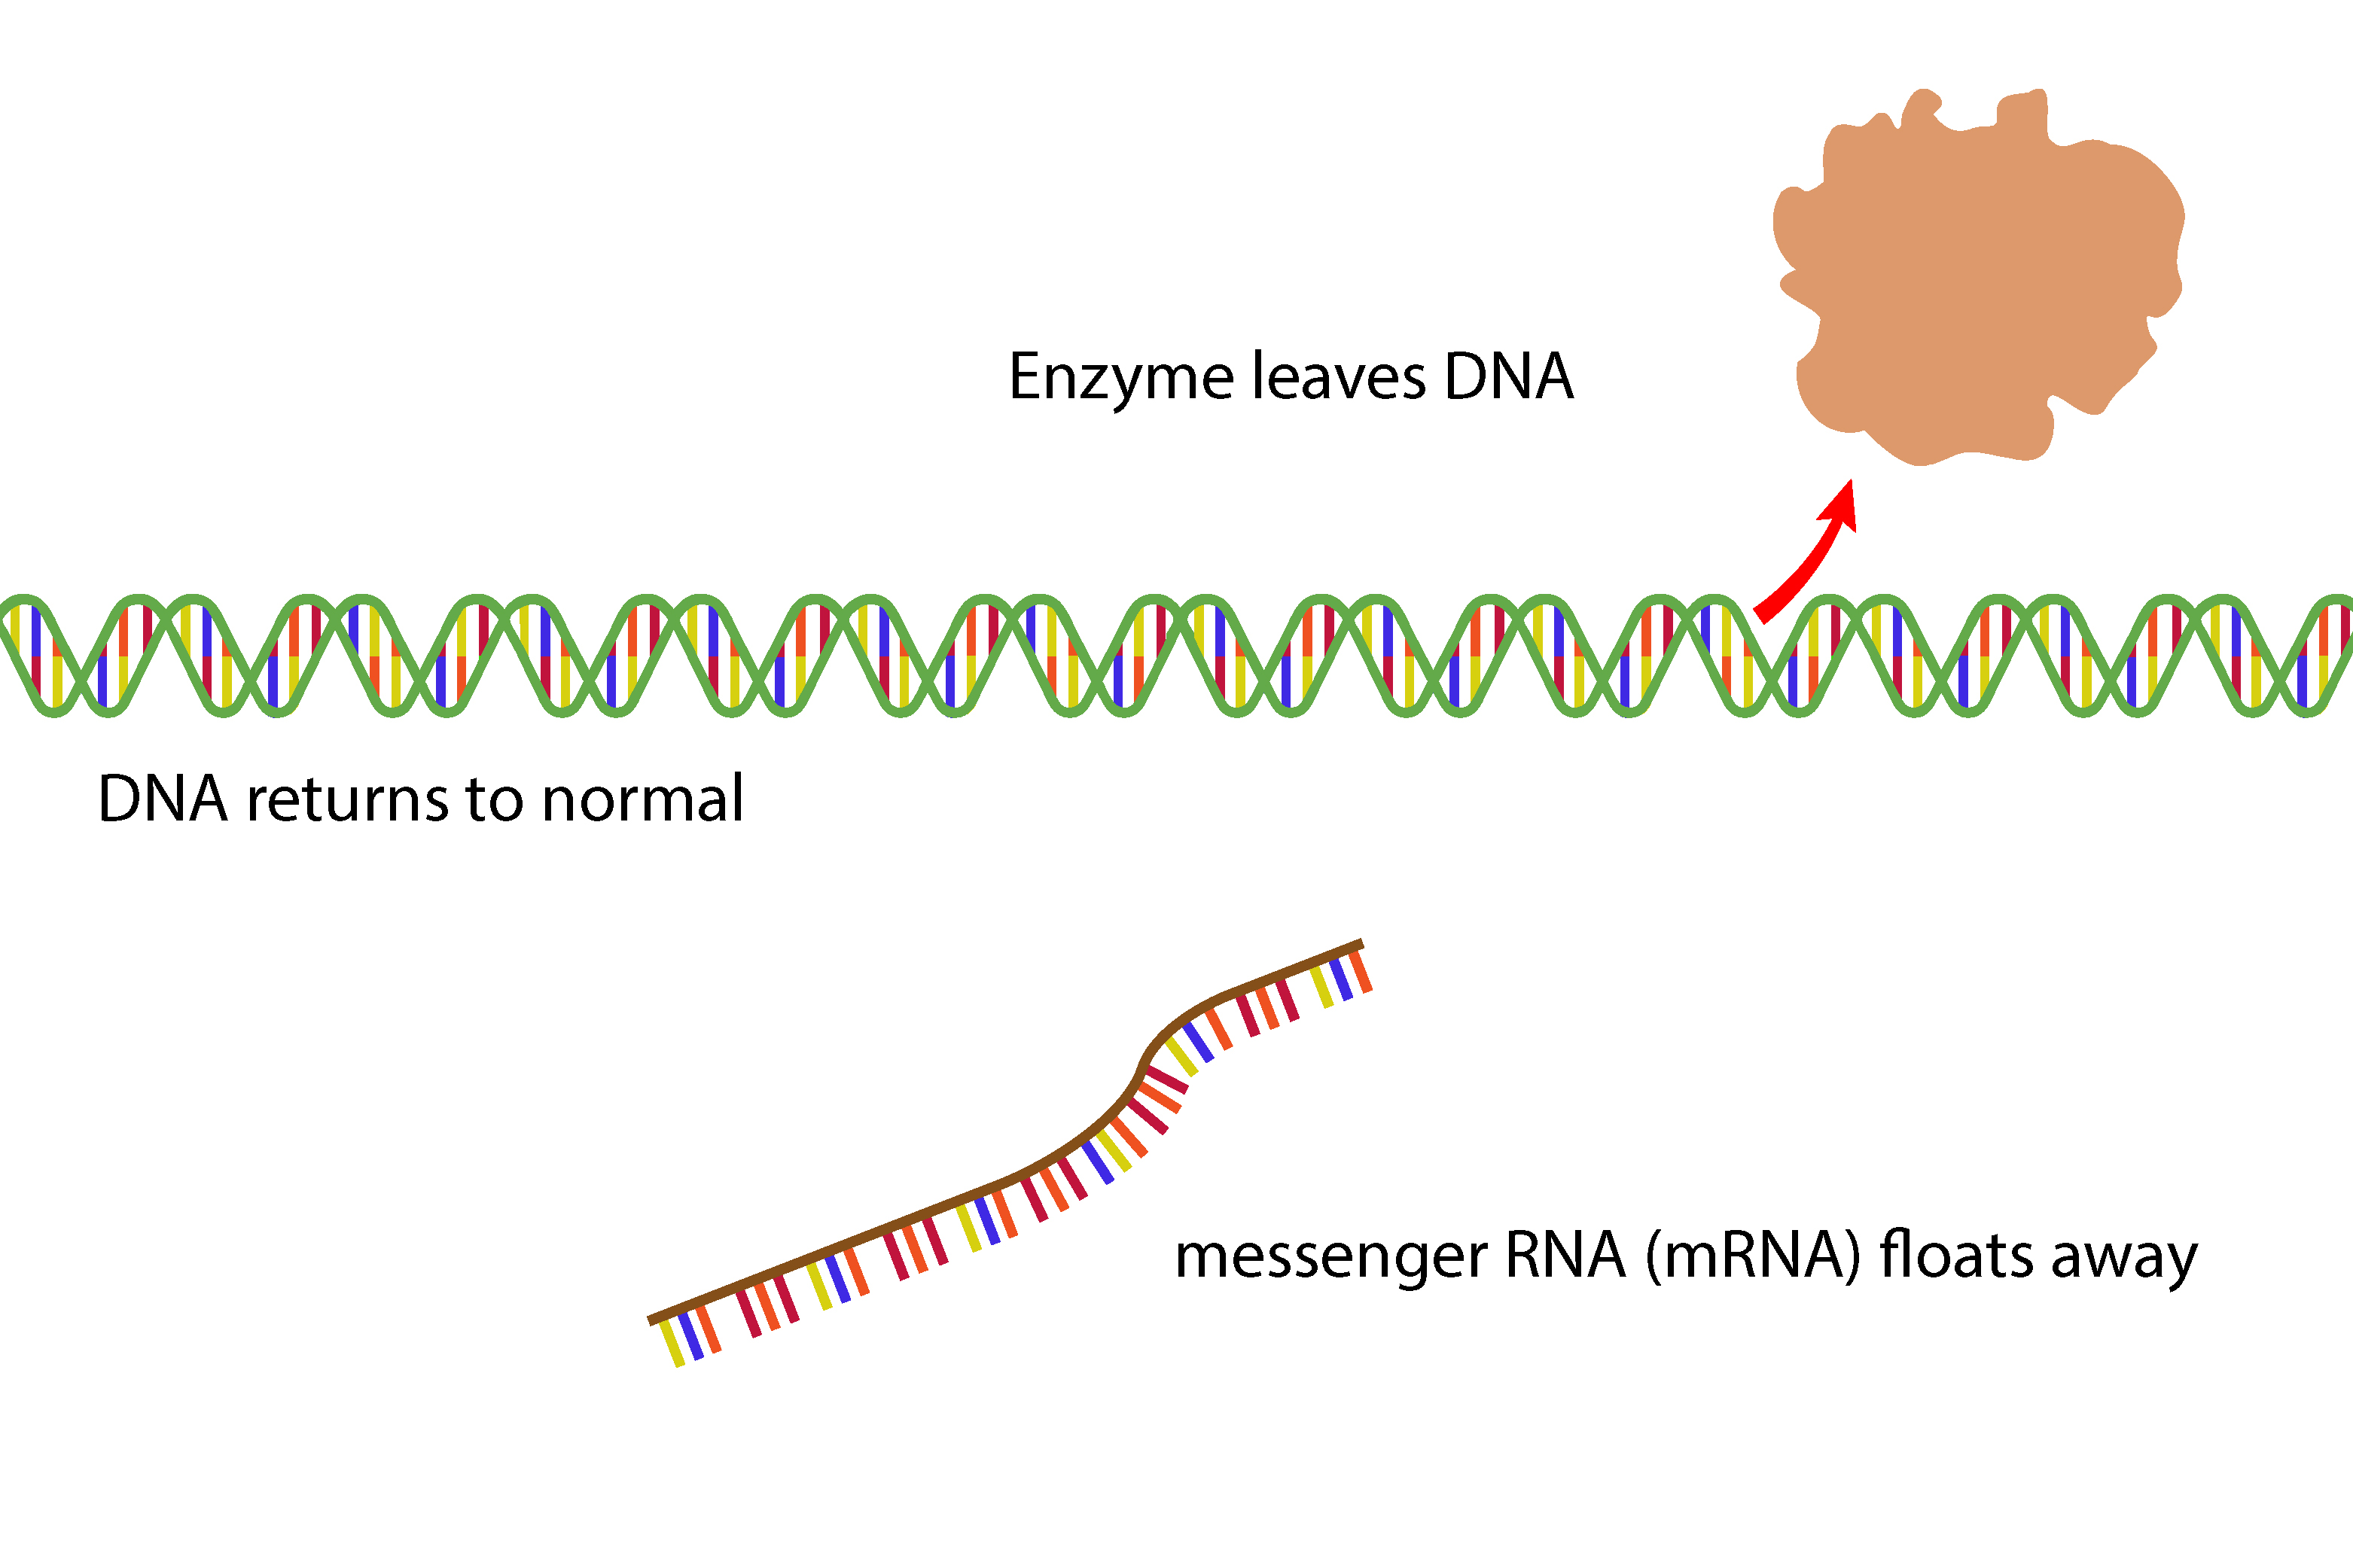 At the end of the gene the enzyme closes the DNA and messenger RNA leaves the DNA